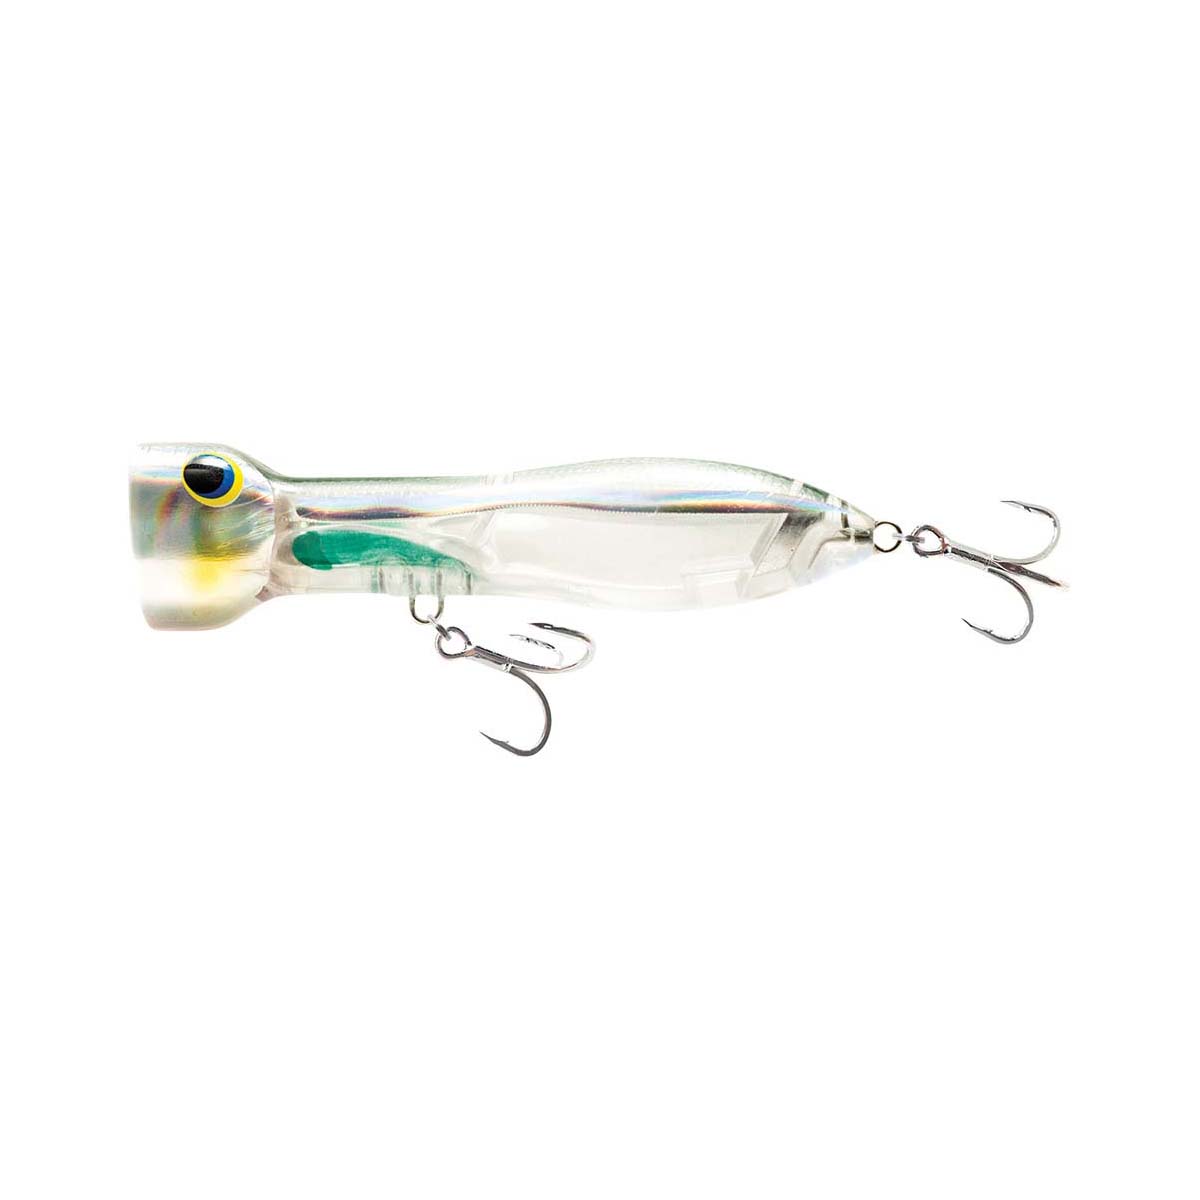 Nomad Chug Norris Surface Lure 5cm Holo Ghost Shad